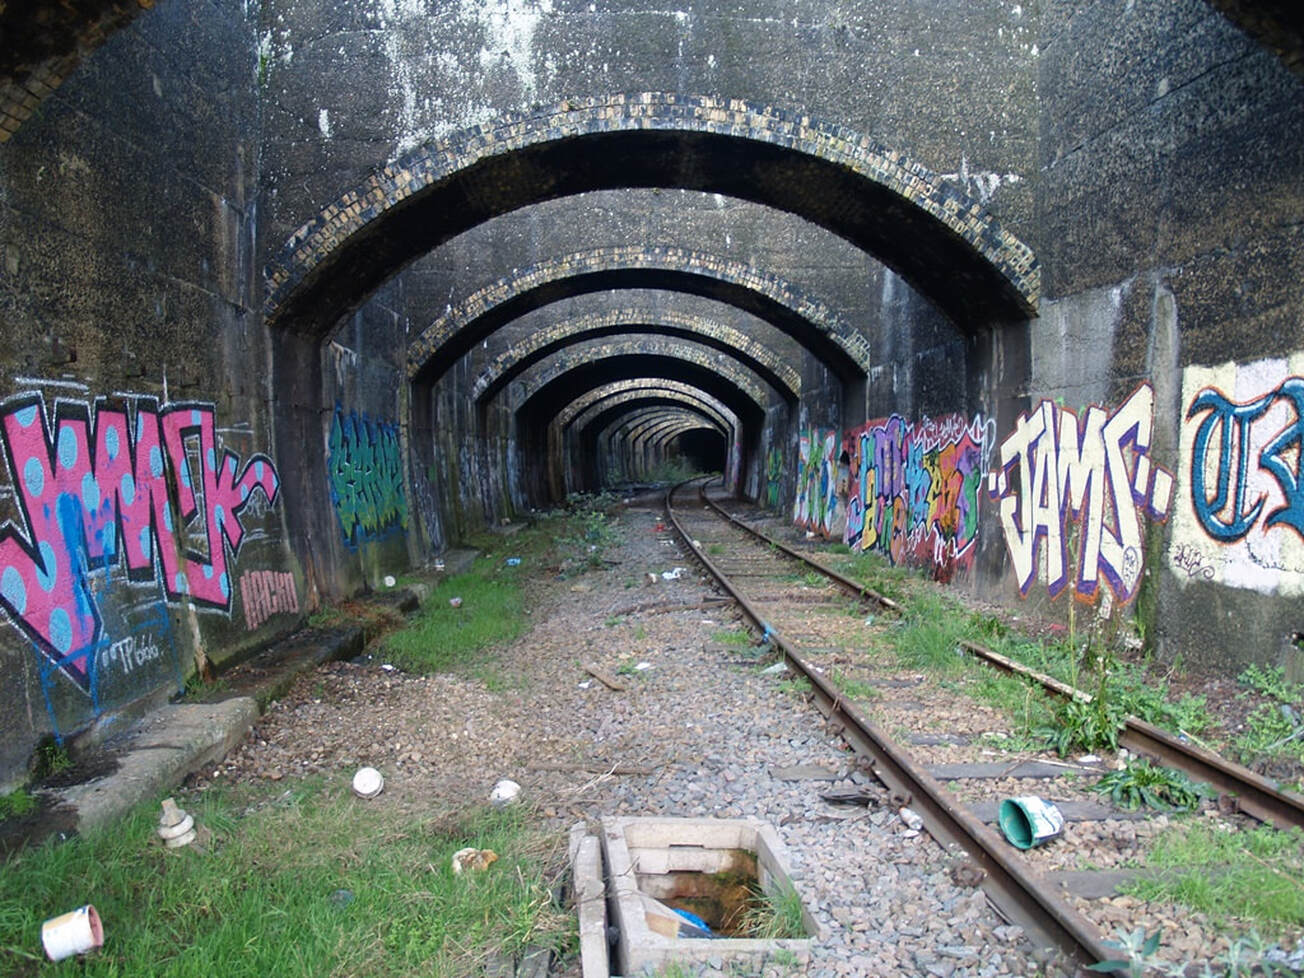 Grafiiti on the walls and disused railway in the Connaught Tunnel, viewed from Silvertown